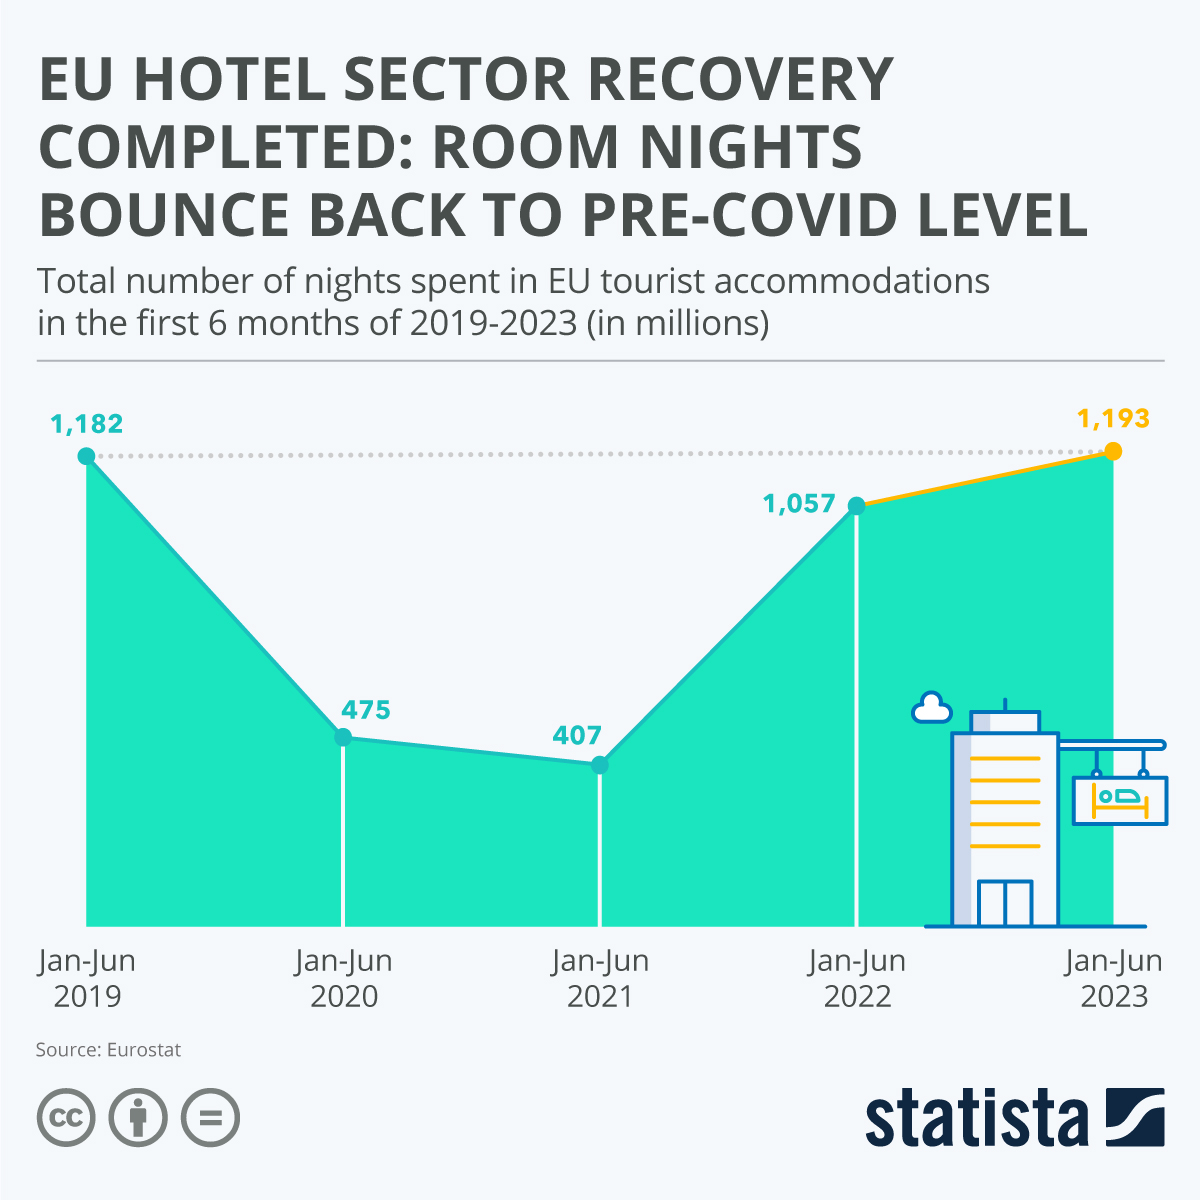 EU Hotel Sector Recovery Completed: Room Nights Bounce Back To Pre-COVID Level— Source: Statista